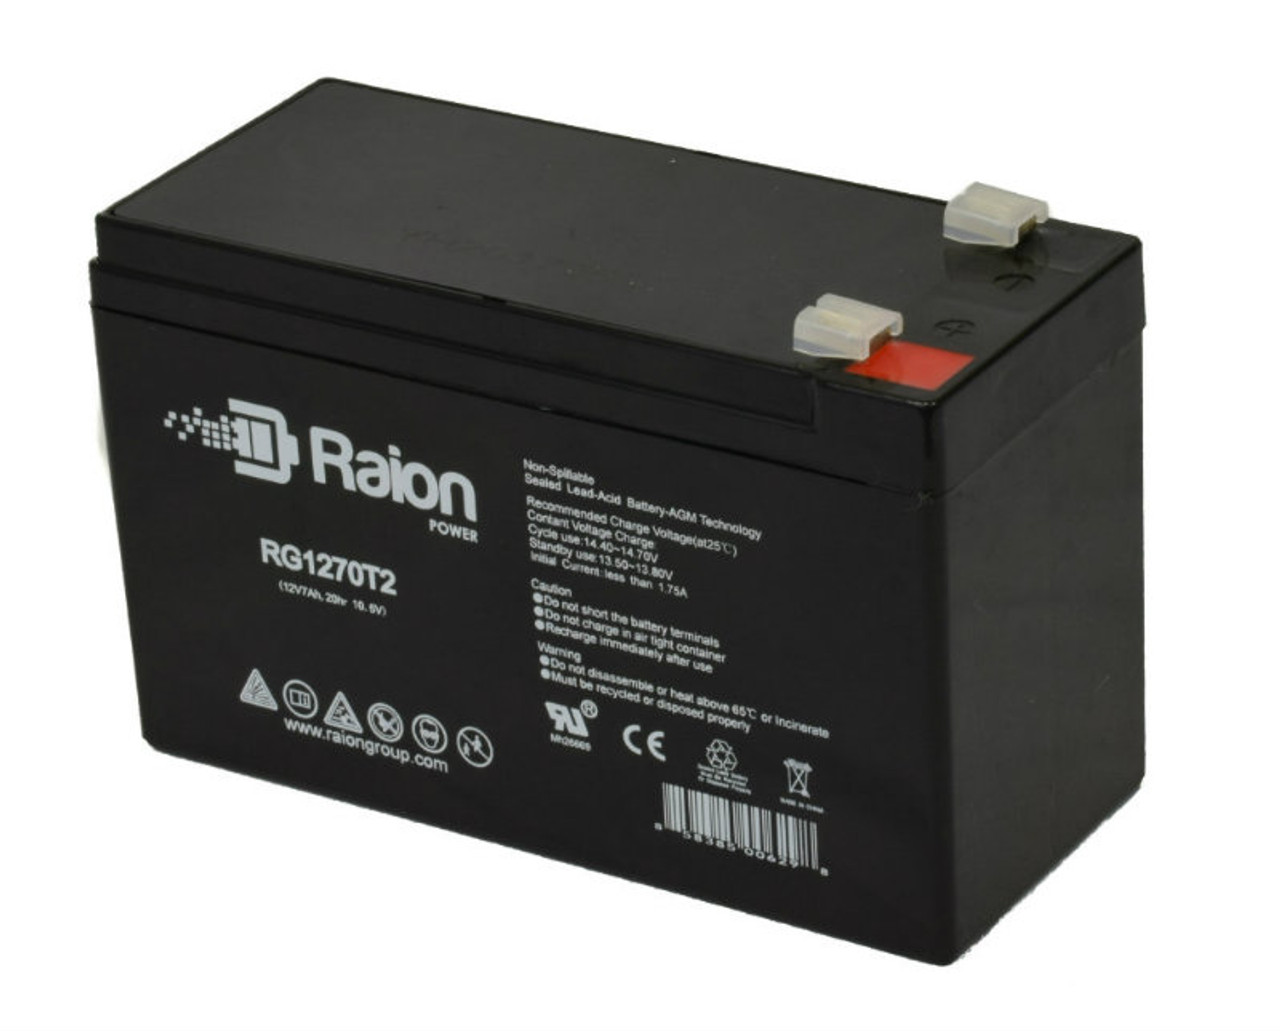 Raion Power Replacement 12V 7Ah RG1270T1 Fire Alarm Battery for Digital Security Power864 (Option 2)